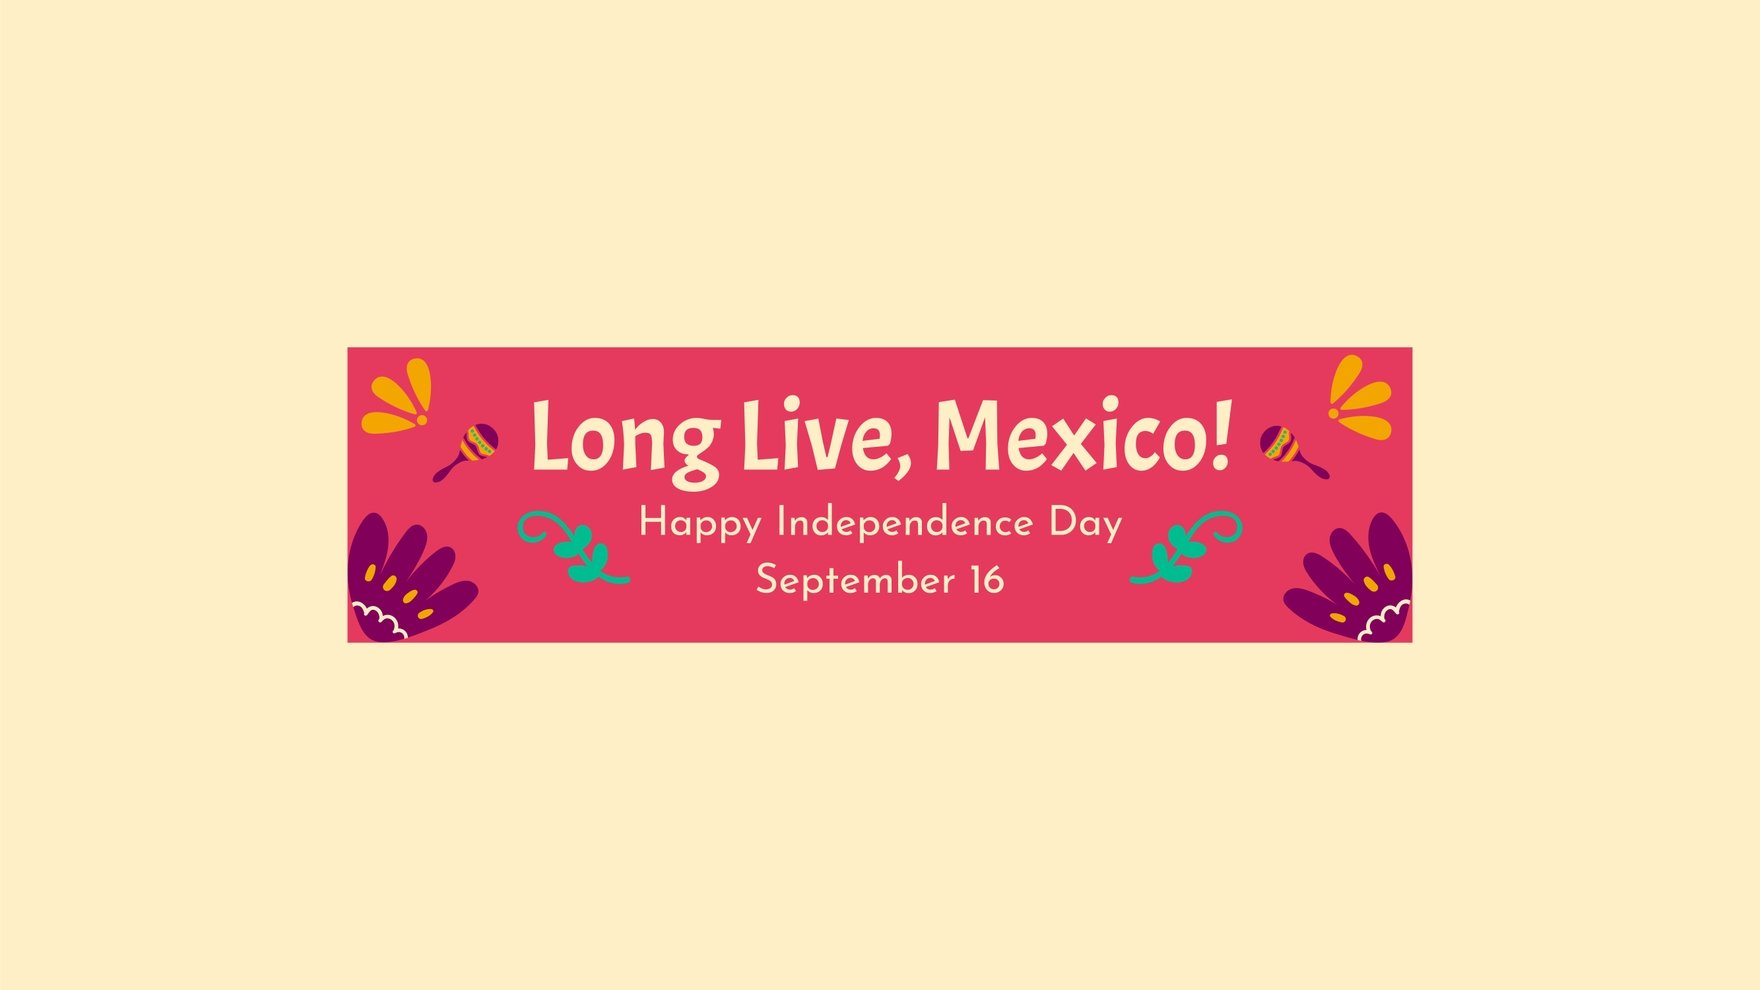 Mexican Independence Day Youtube Banner in Word, Google Docs, Illustrator, PSD, Publisher, EPS, SVG, JPG, PNG